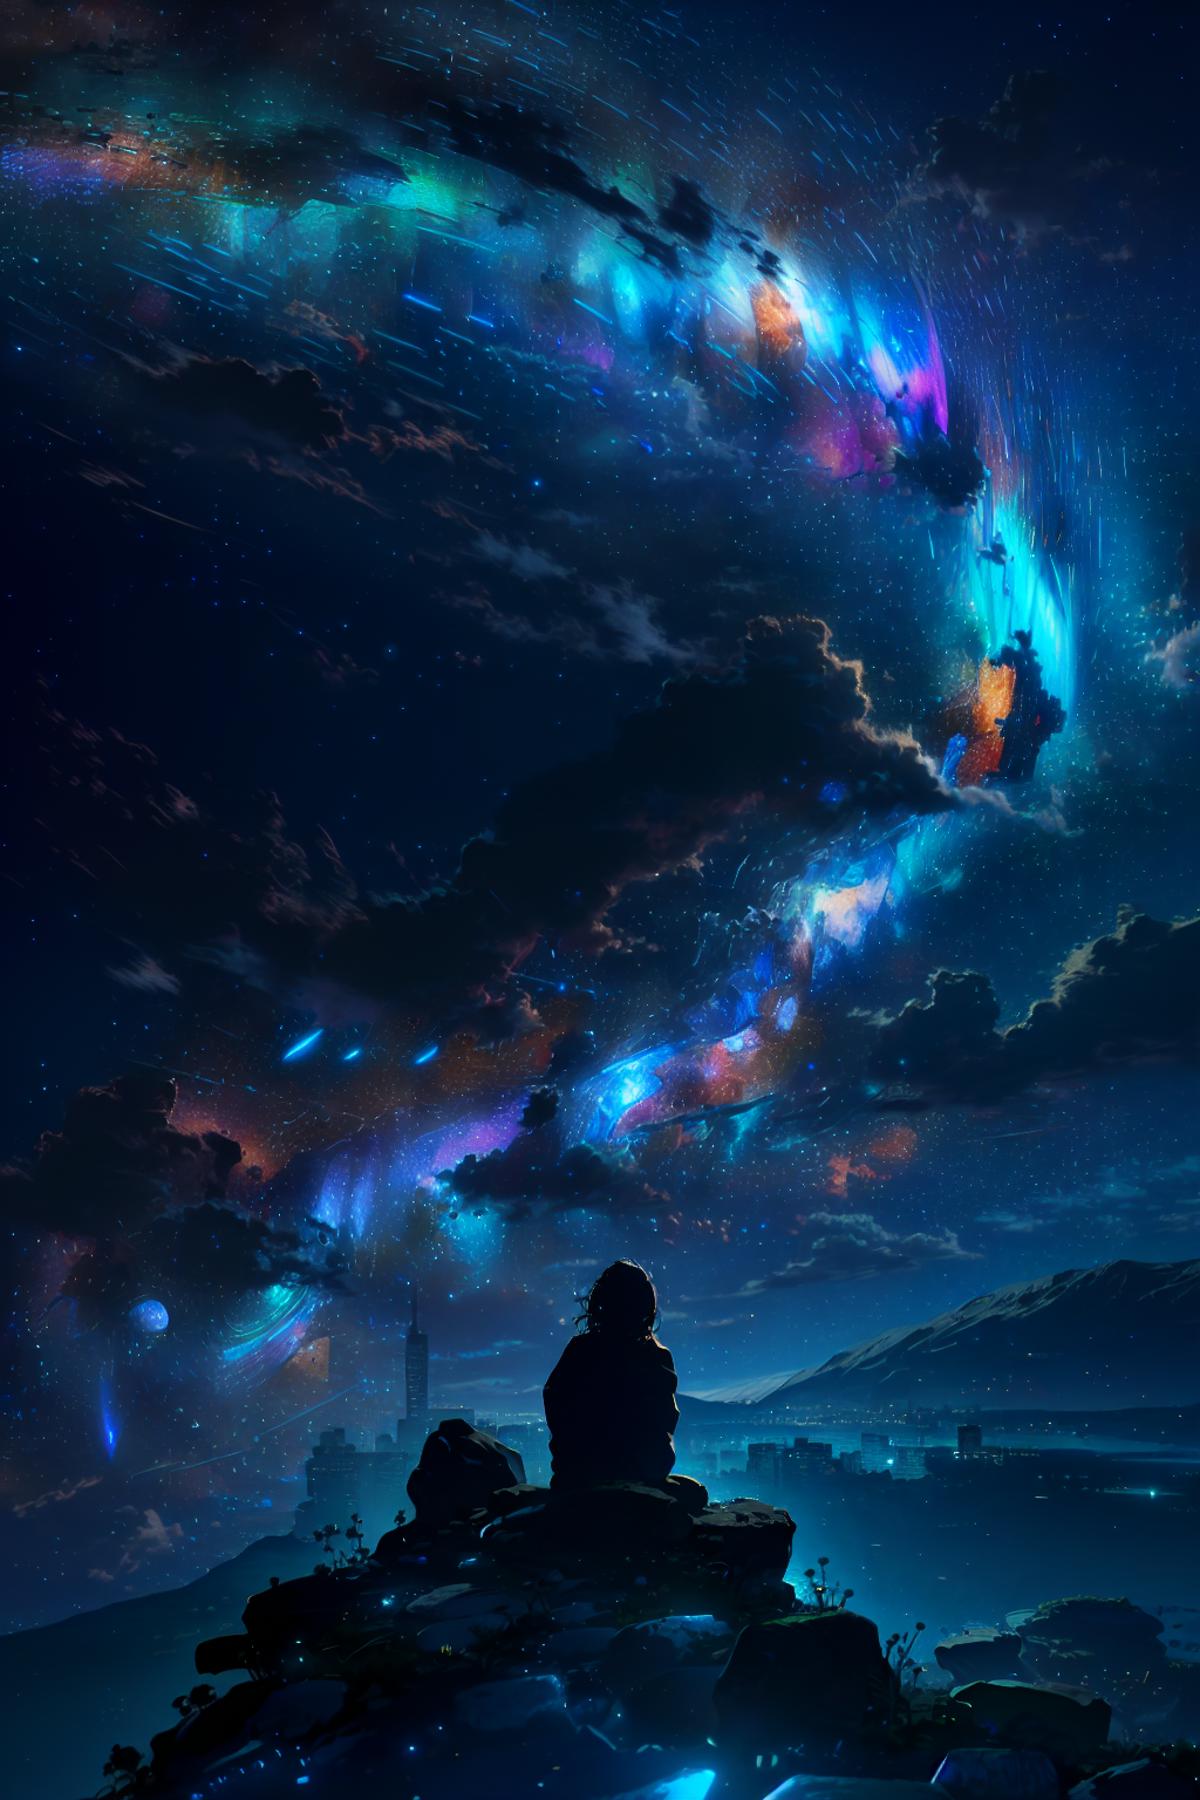 A person sitting under a vivid night sky full of stars and nebulae